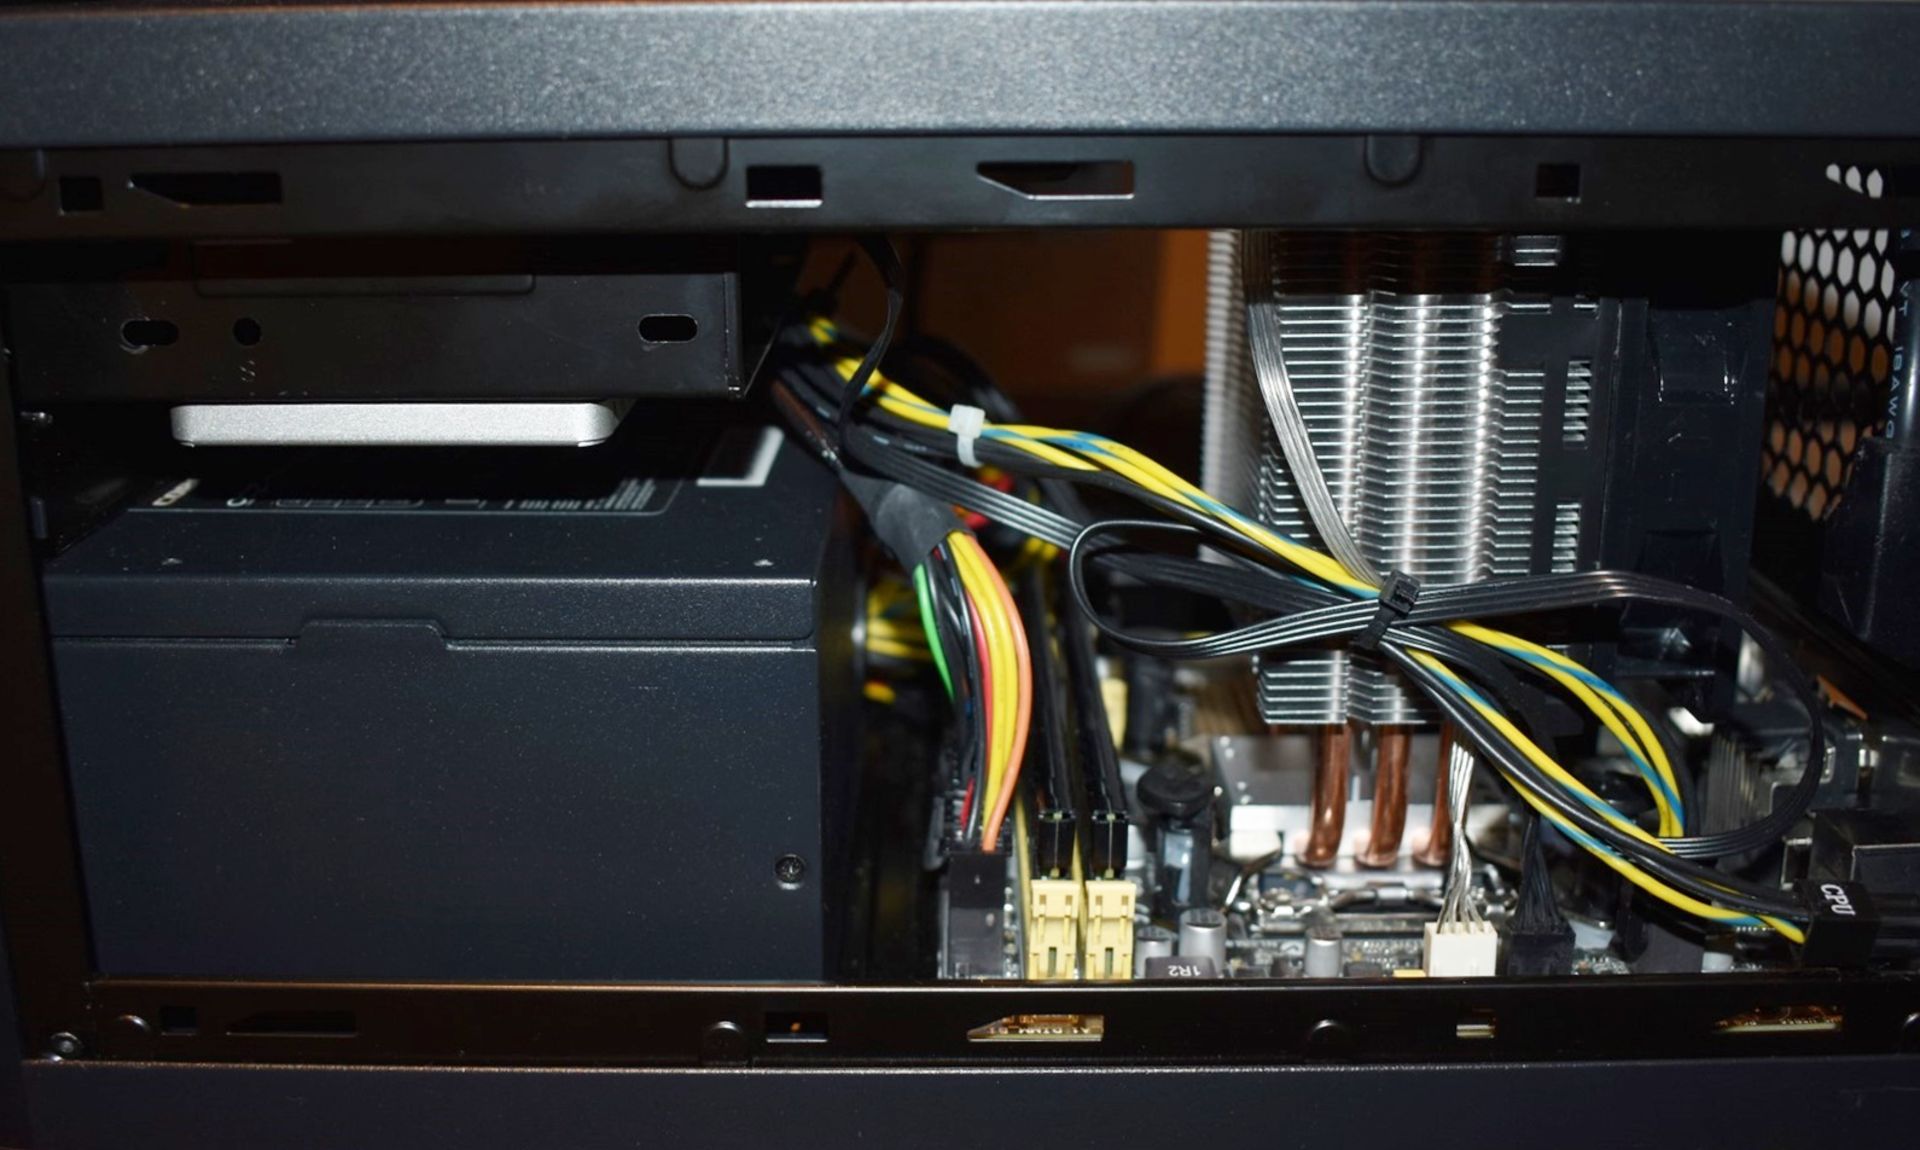 1 x Mini ITX Computer in Sharkroon PC Case - Features an Intel I5-4590T 3ghz Quad Core Processor, - Image 2 of 3